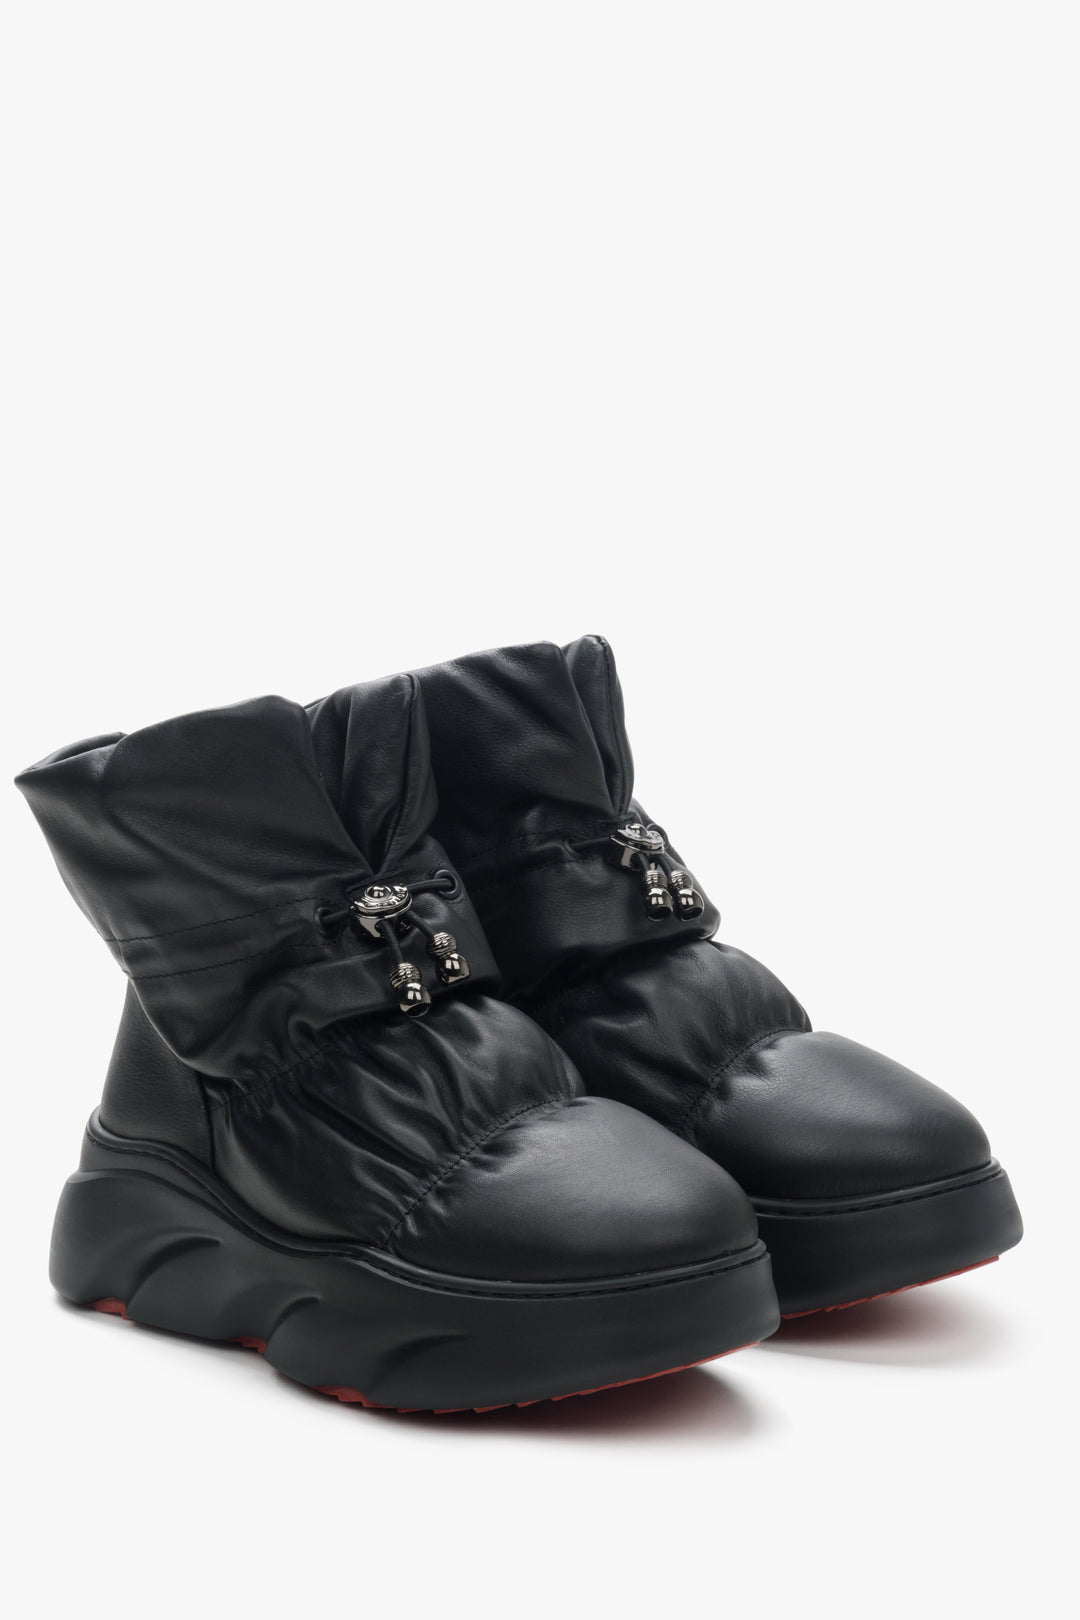 Insulated women's snow boots in black color by Estro.